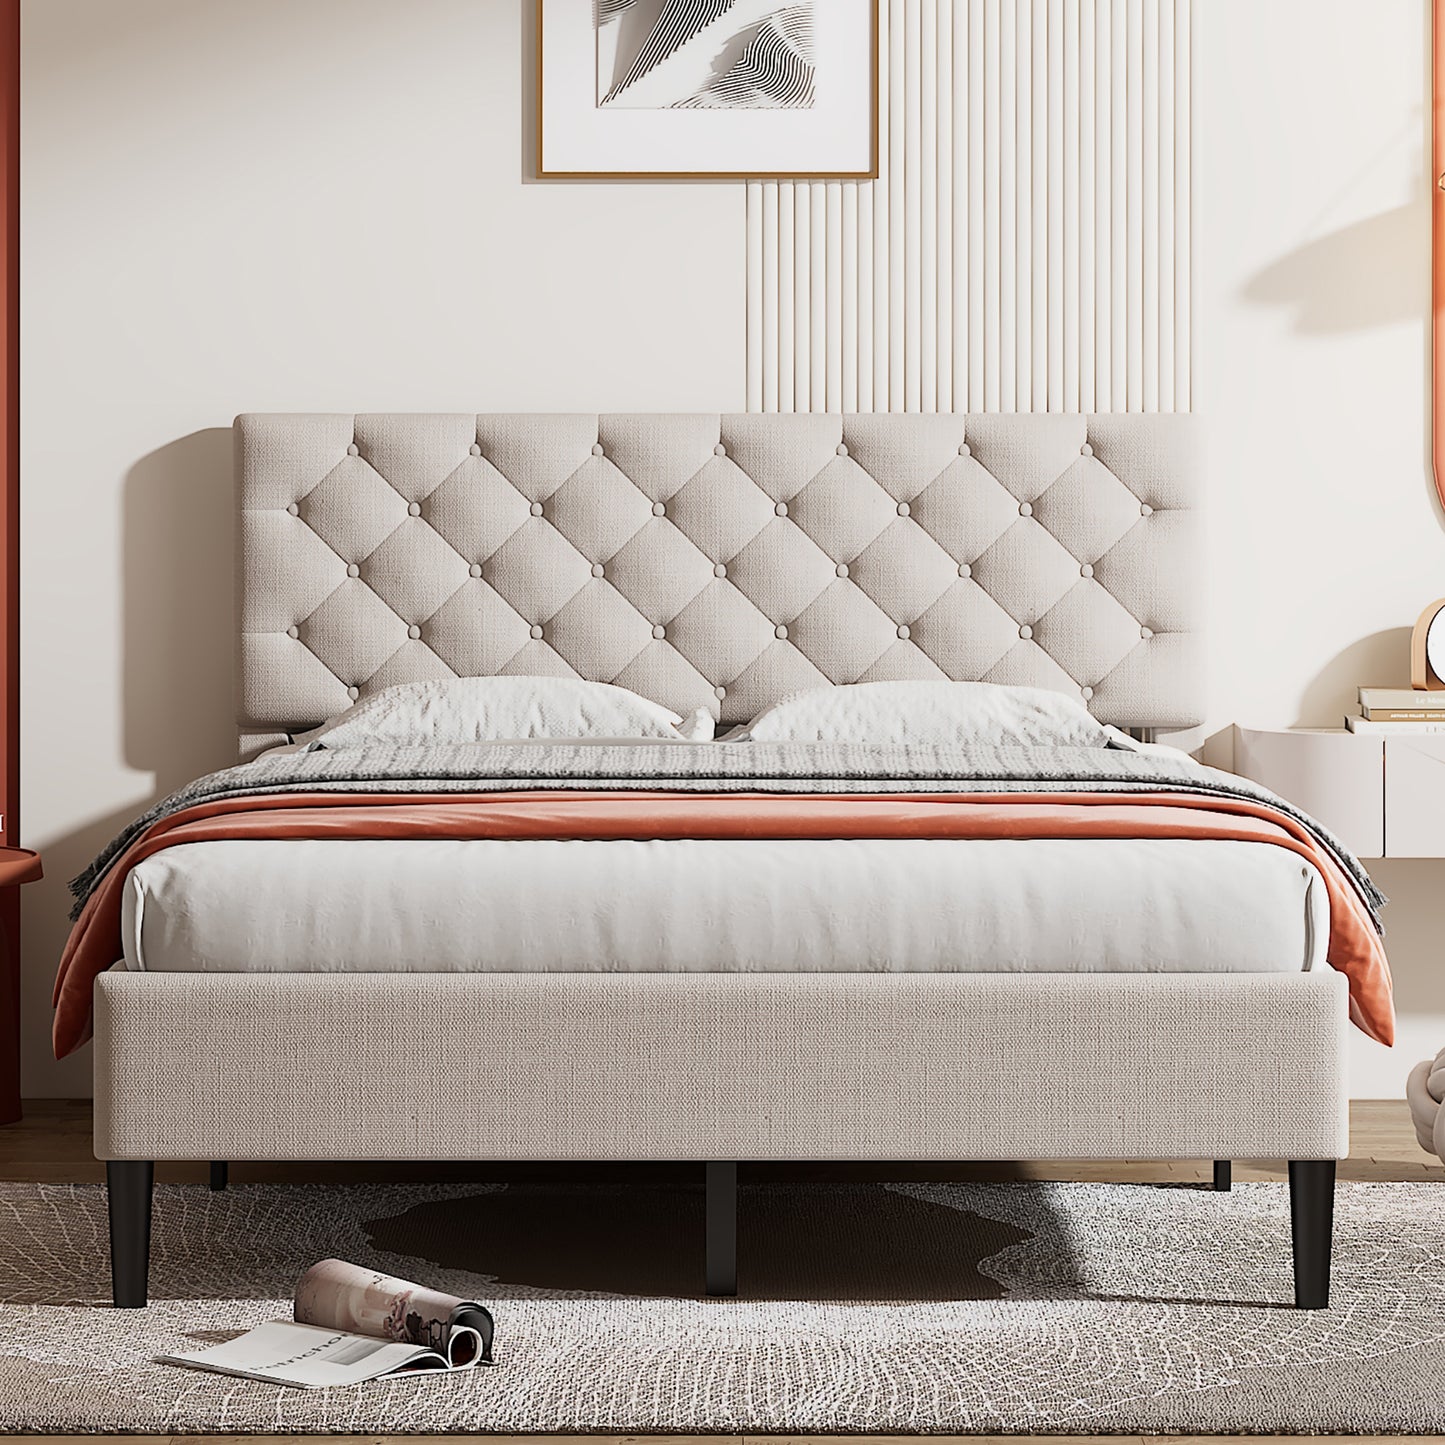 SYNGAR Full Size Platform Bed Frame with Linen Fabric Upholstered Button Tufted Headboard, Sturdy Sturdy Frame and Strong Wooden Slats, No Box Spring Needed, Gray